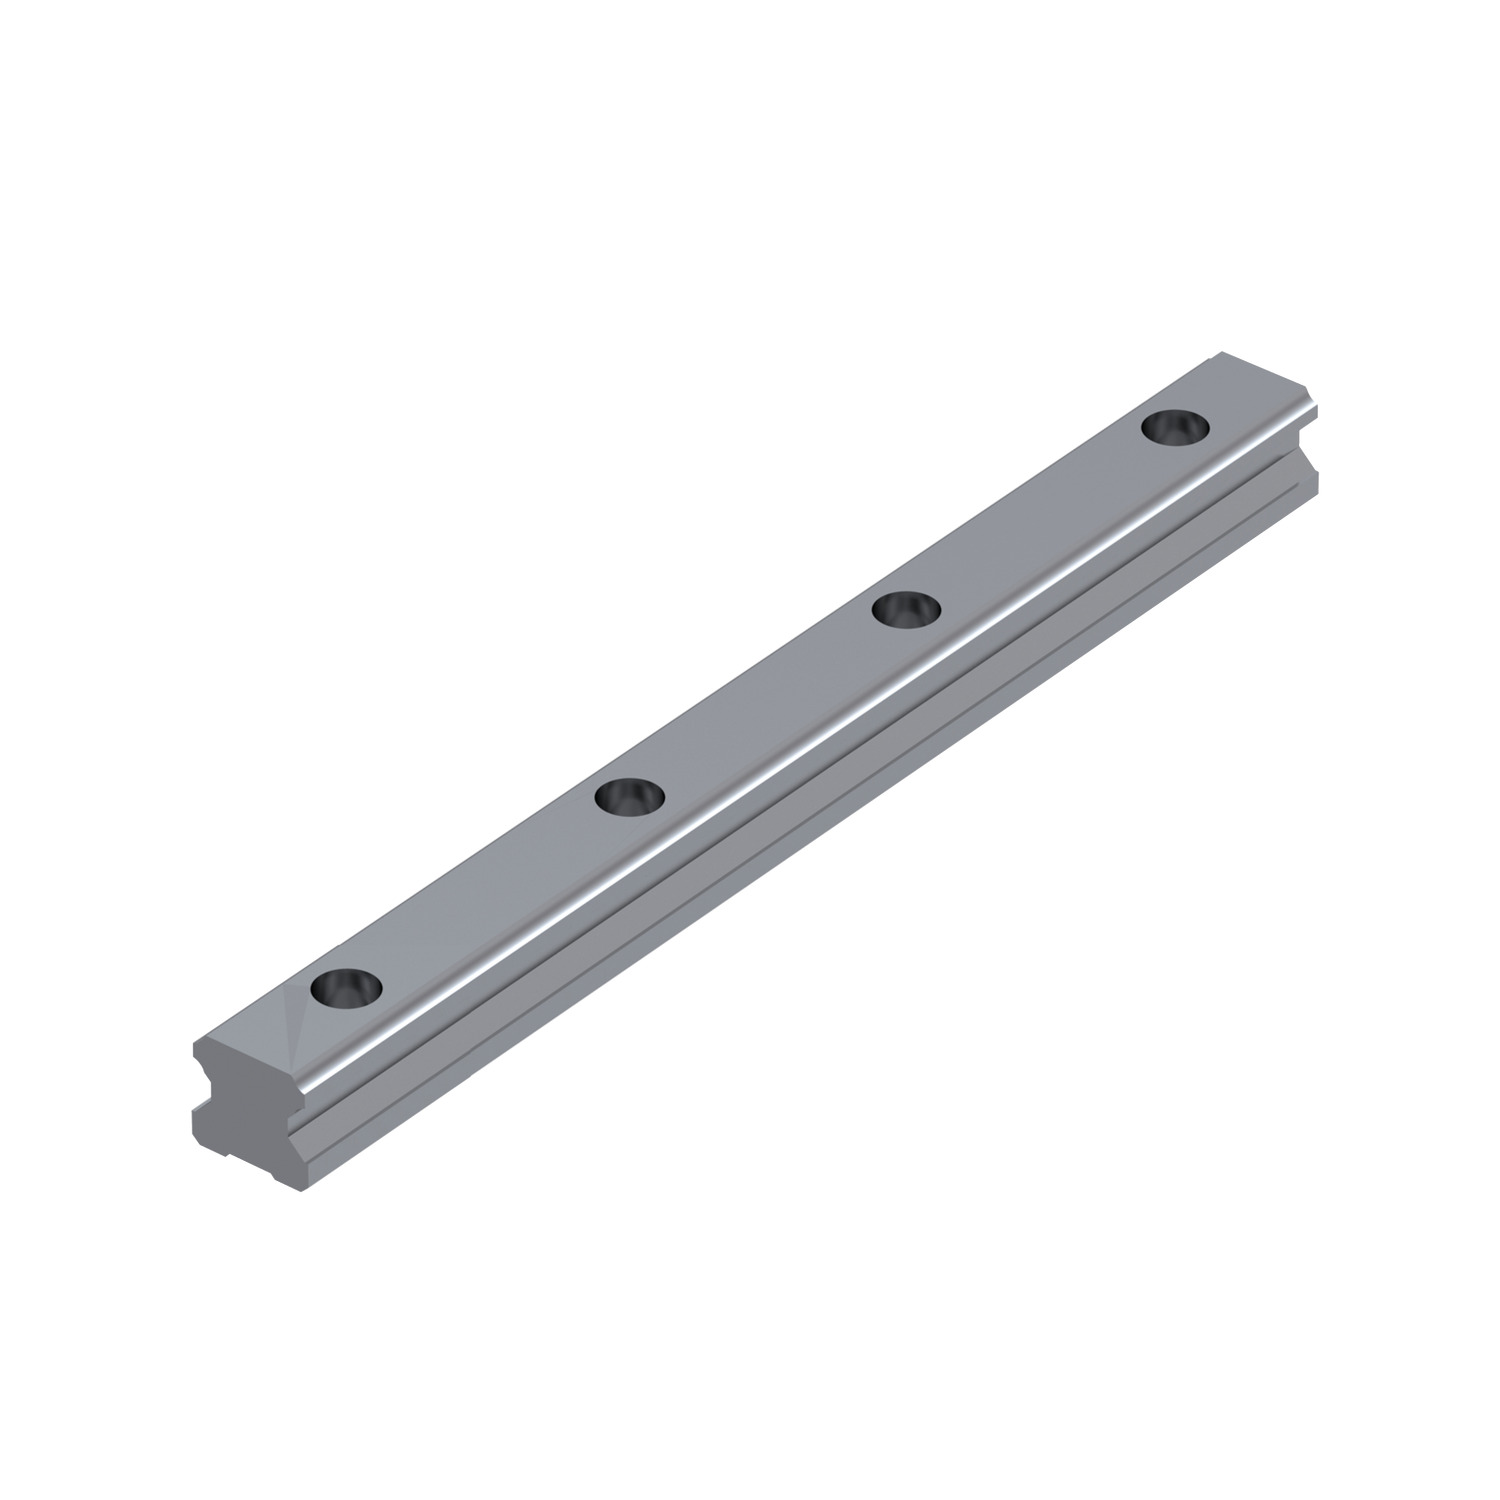 L1016.20-0160 Linear guide rail 20mm 160 Hardened and ground steel. EC:20163105 WG:05063055289245